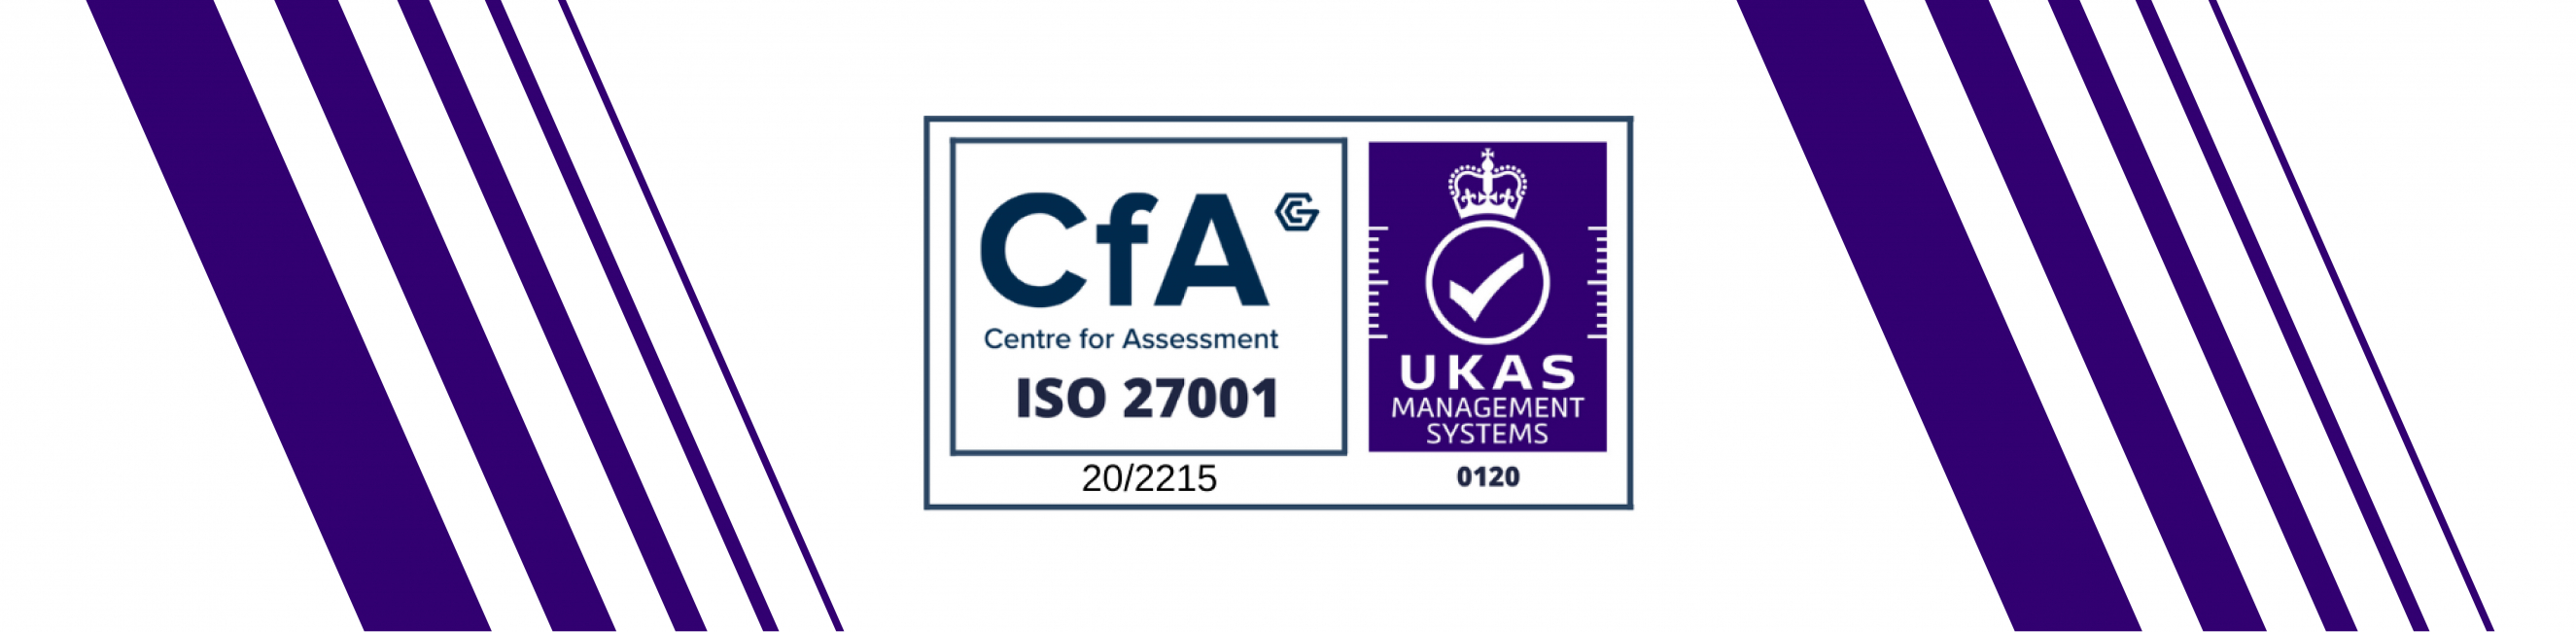 CFA Centre For Assessment ISO 27001 20/2215 UKAS Management Systems 0120